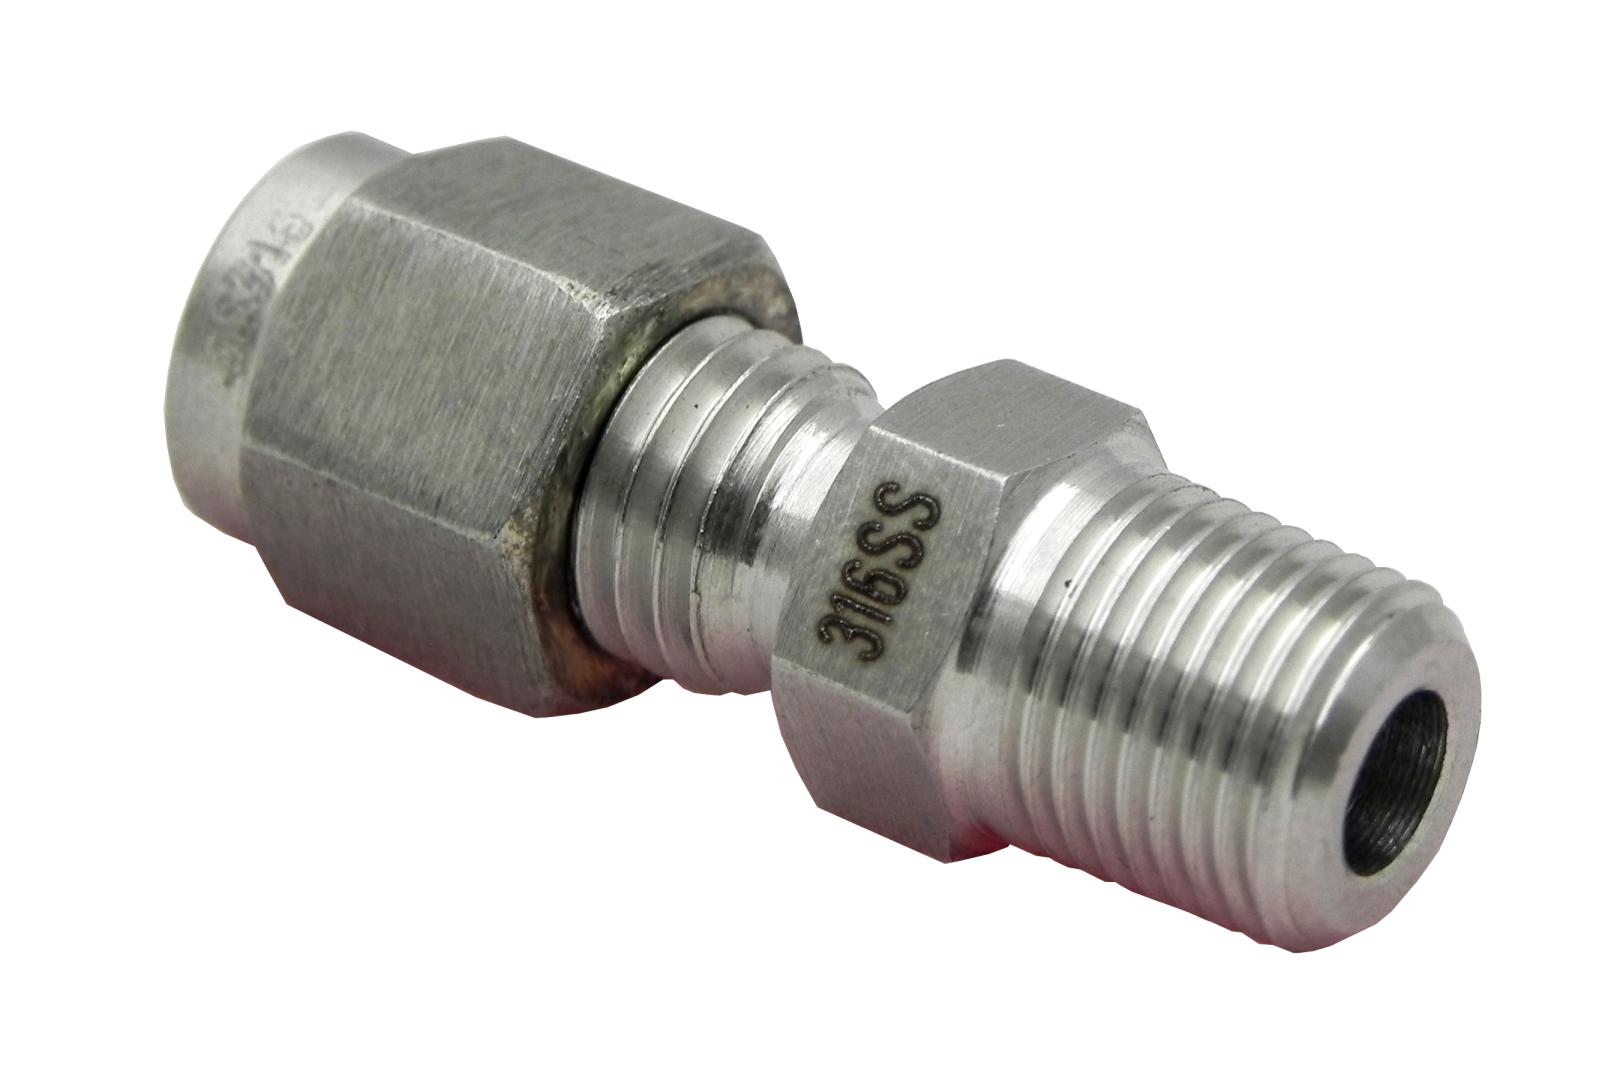 Thermocouple Compression Fitting Adapters 1 8 Inch NPT 3 ?itok=bxvW94aX